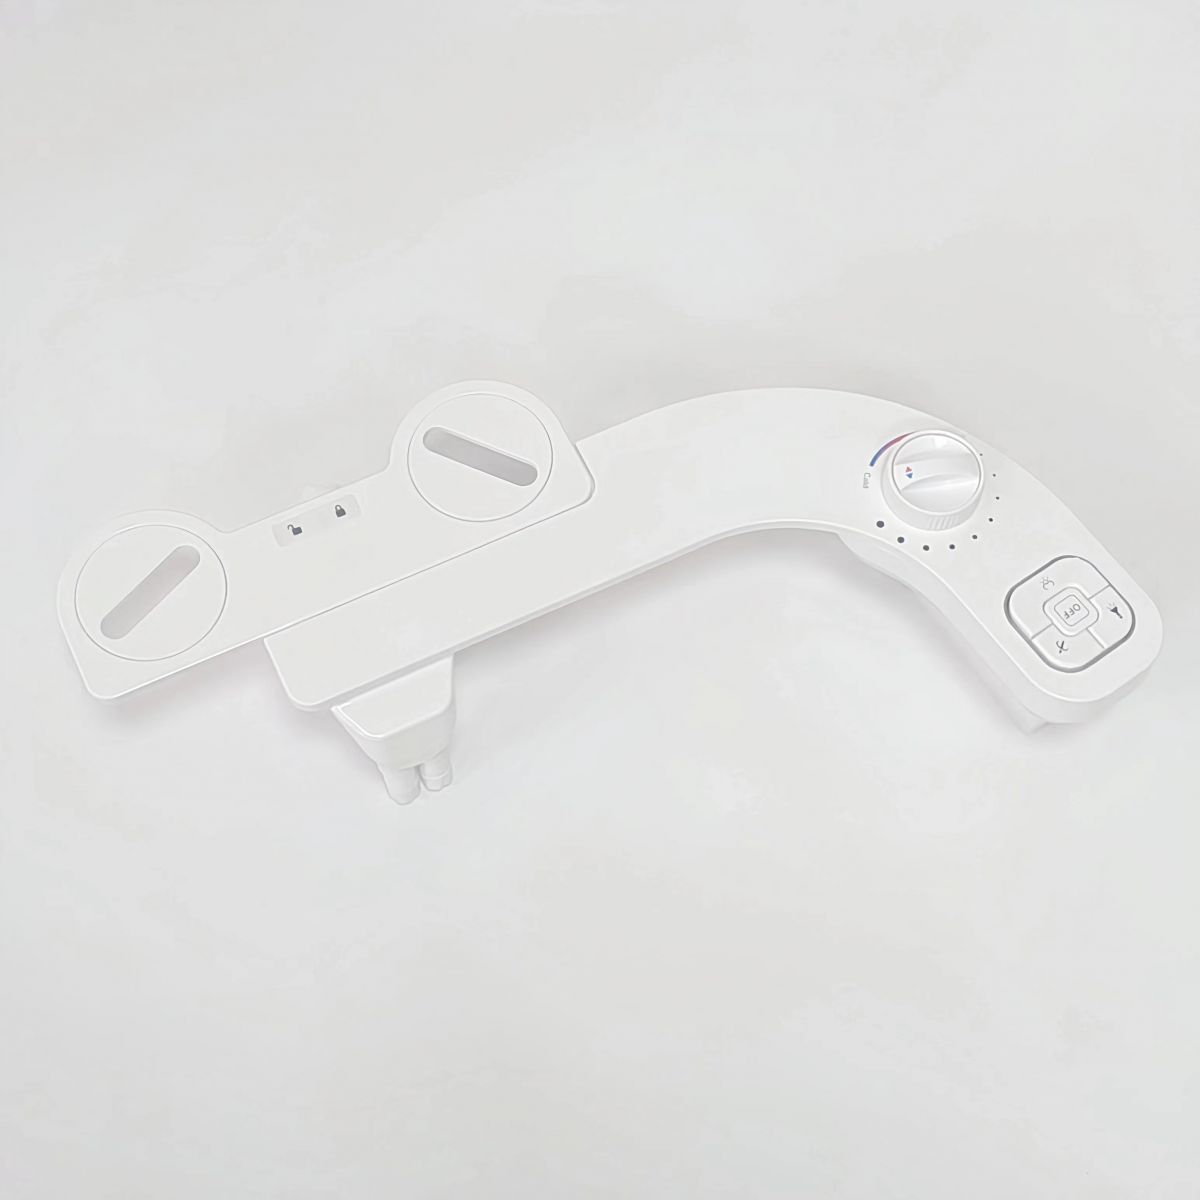 Heated Self-sufficient Bidet Attachment for Toilet